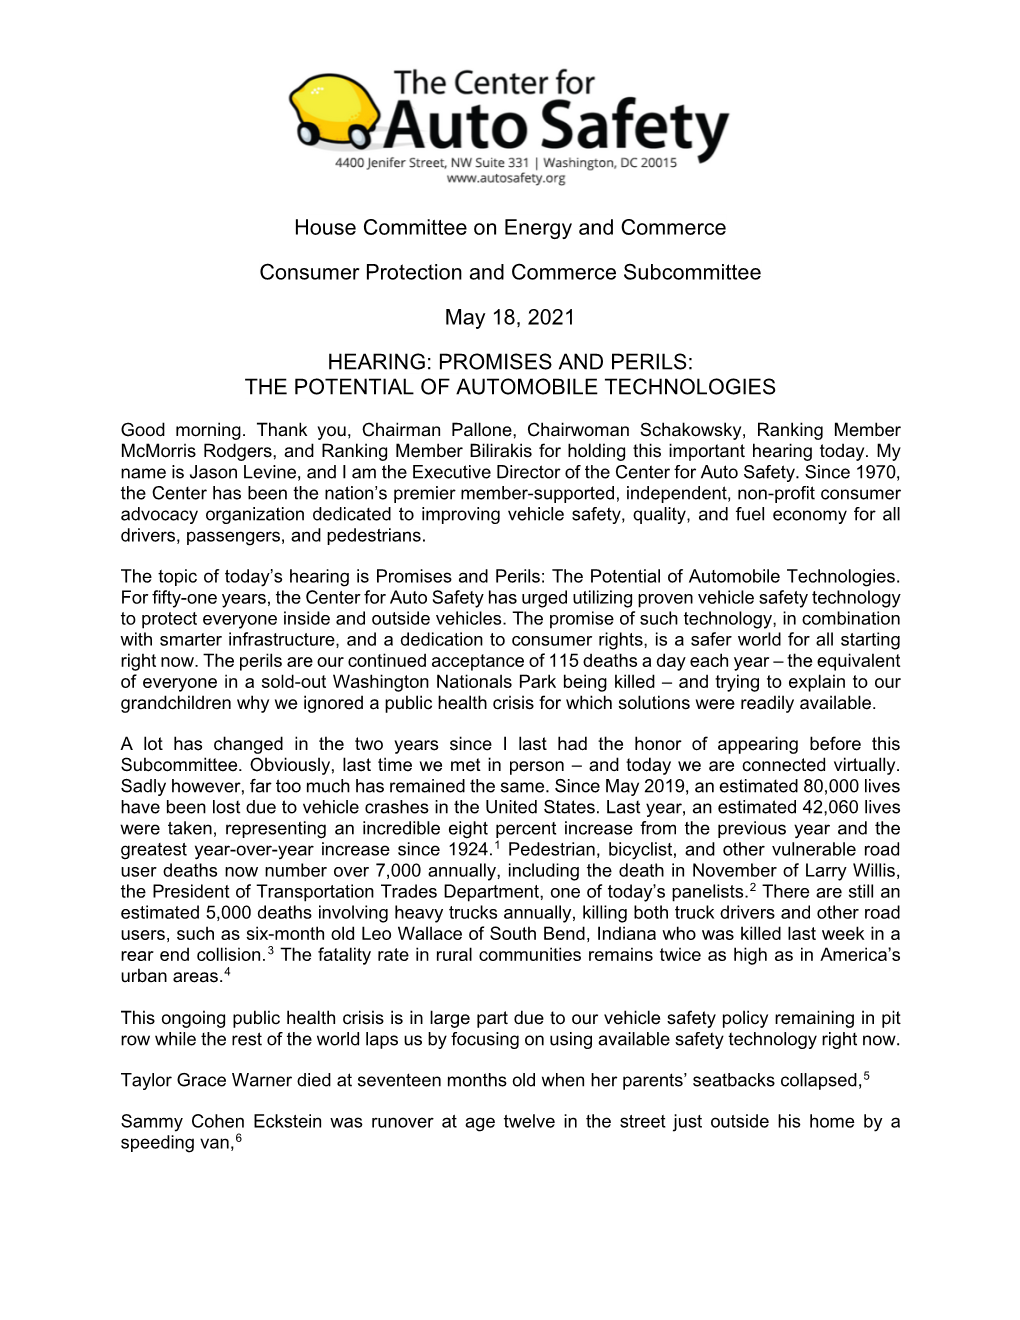 House Committee on Energy and Commerce Consumer Protection and Commerce Subcommittee May 18, 2021 HEARING: PROMISES and PERILS